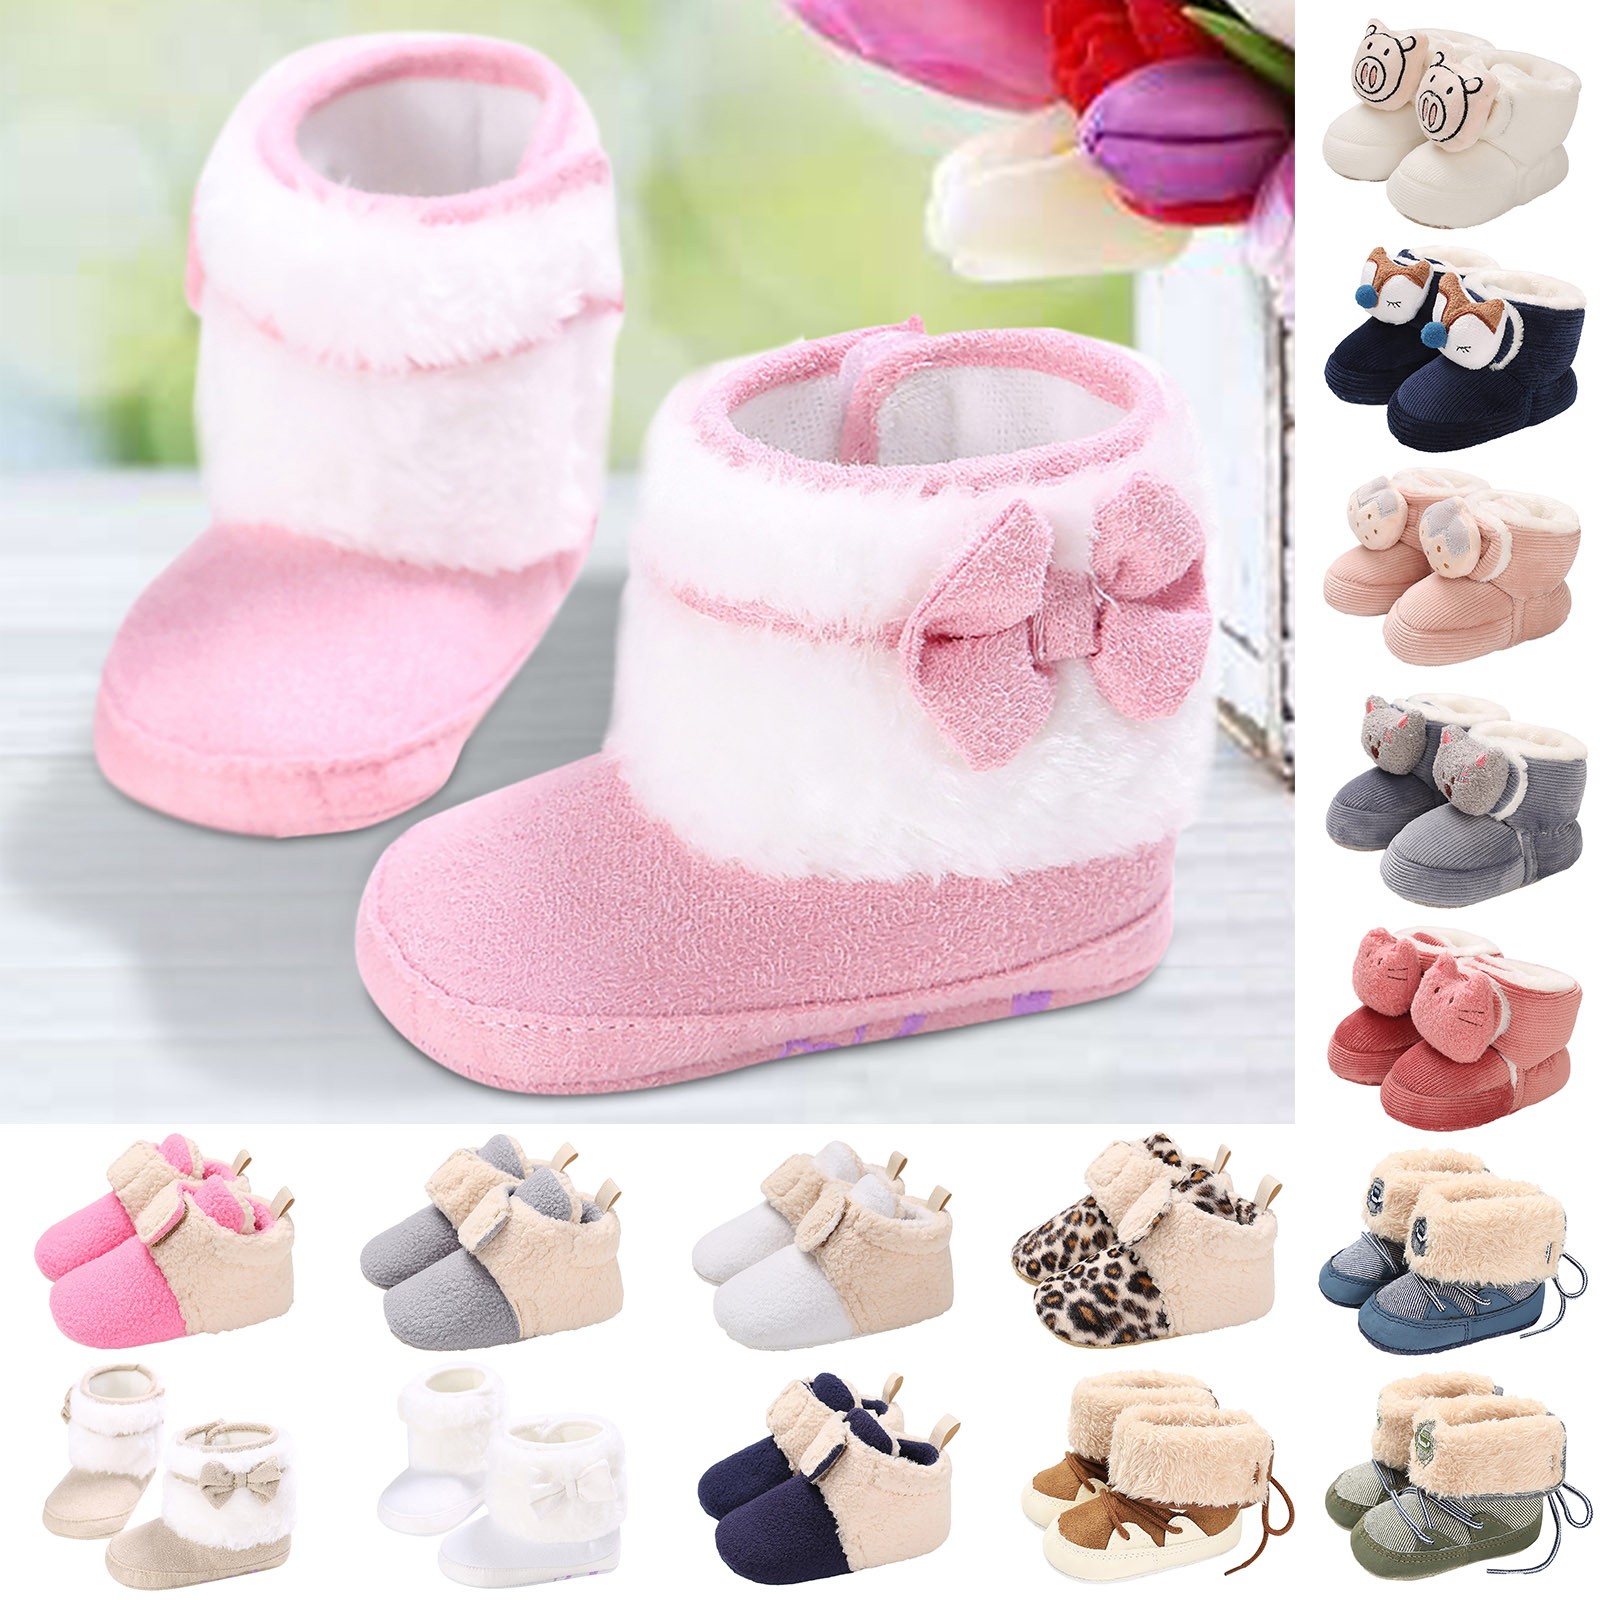 UlyssesAl Infant Boots Snow Baby Girls Boys Warm Boots Slip Rubber Sole